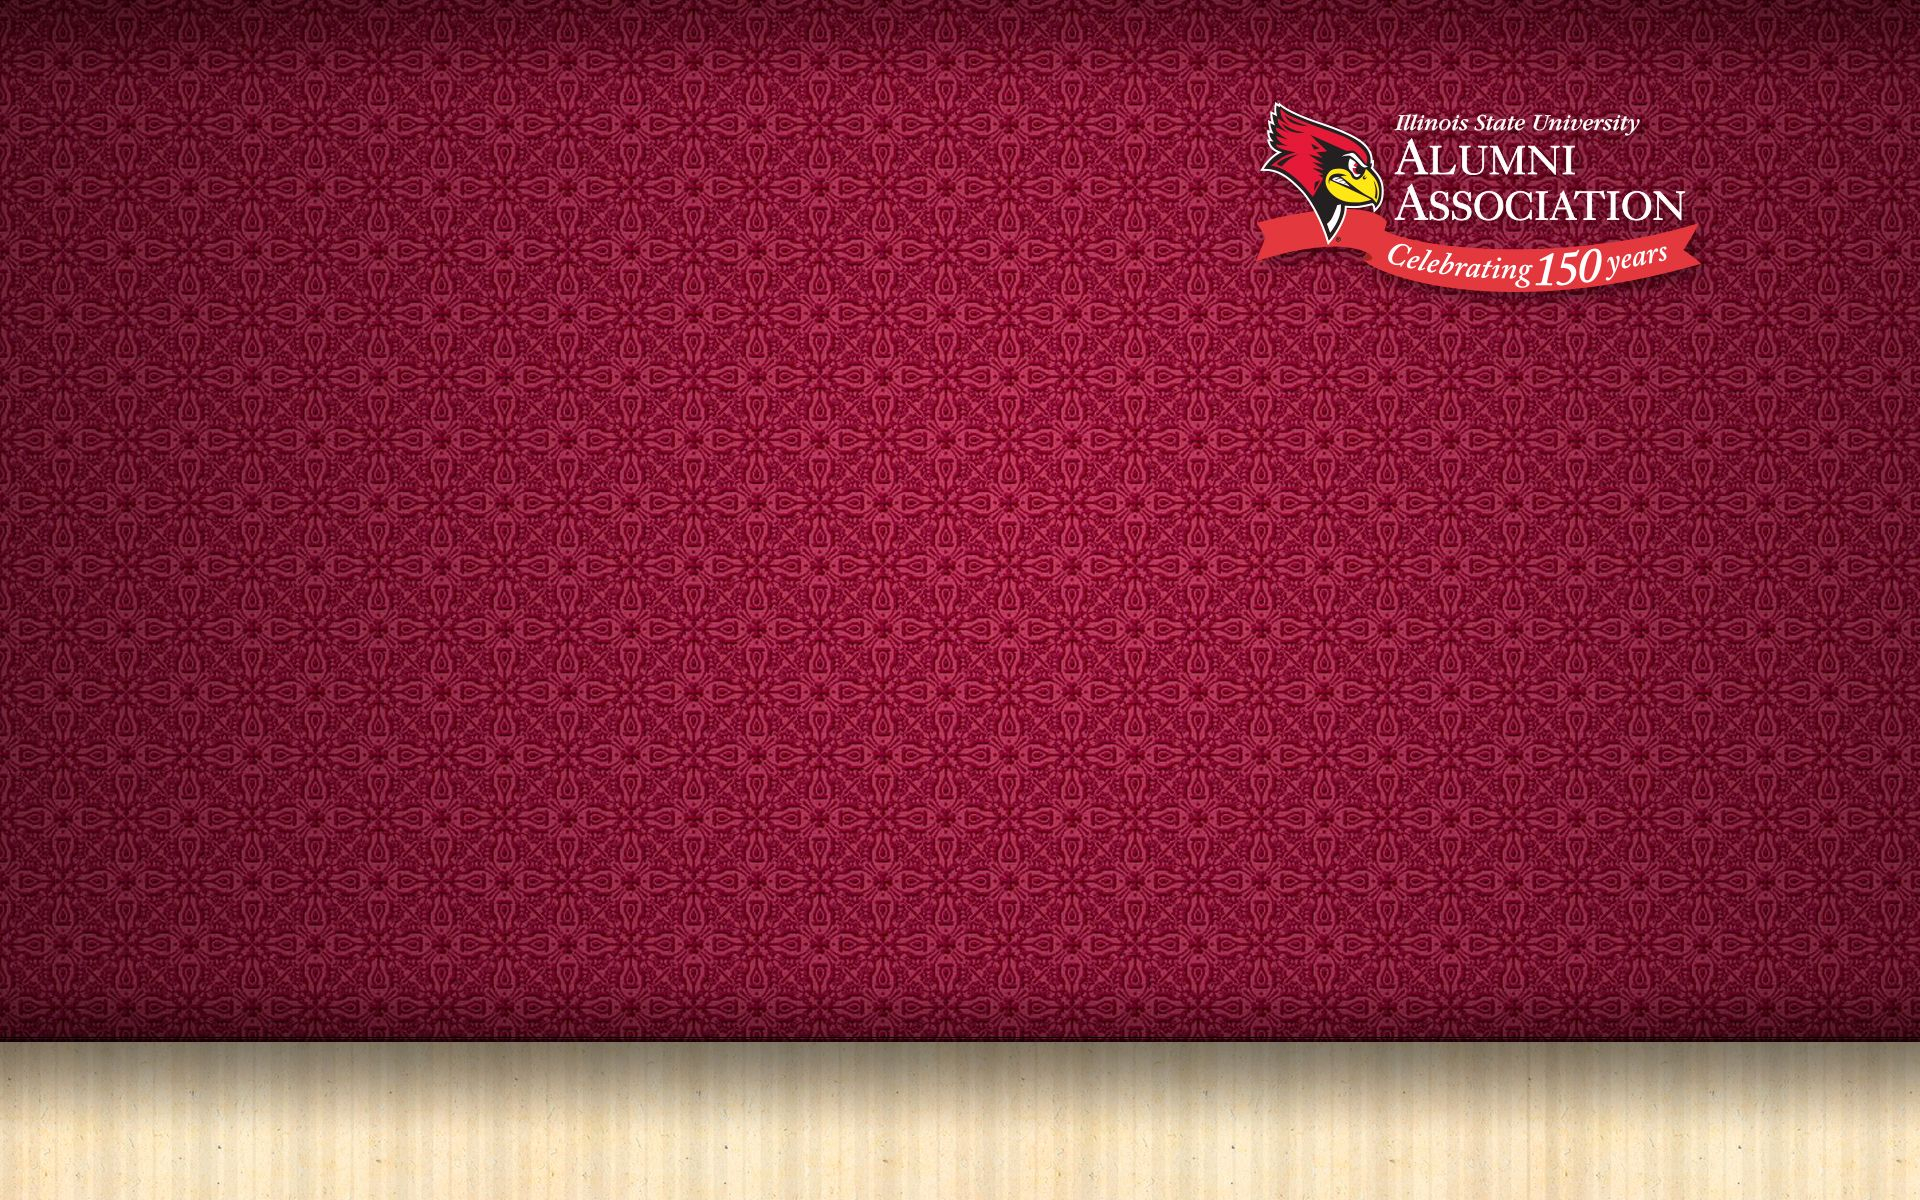 1920x1200 One of our new desktop wallpapers for the Alumni Association's 150th anniversary in 2013. More 150t&acirc;&#128;&brvbar; | Alumni association, Illinois state university, Illinois state